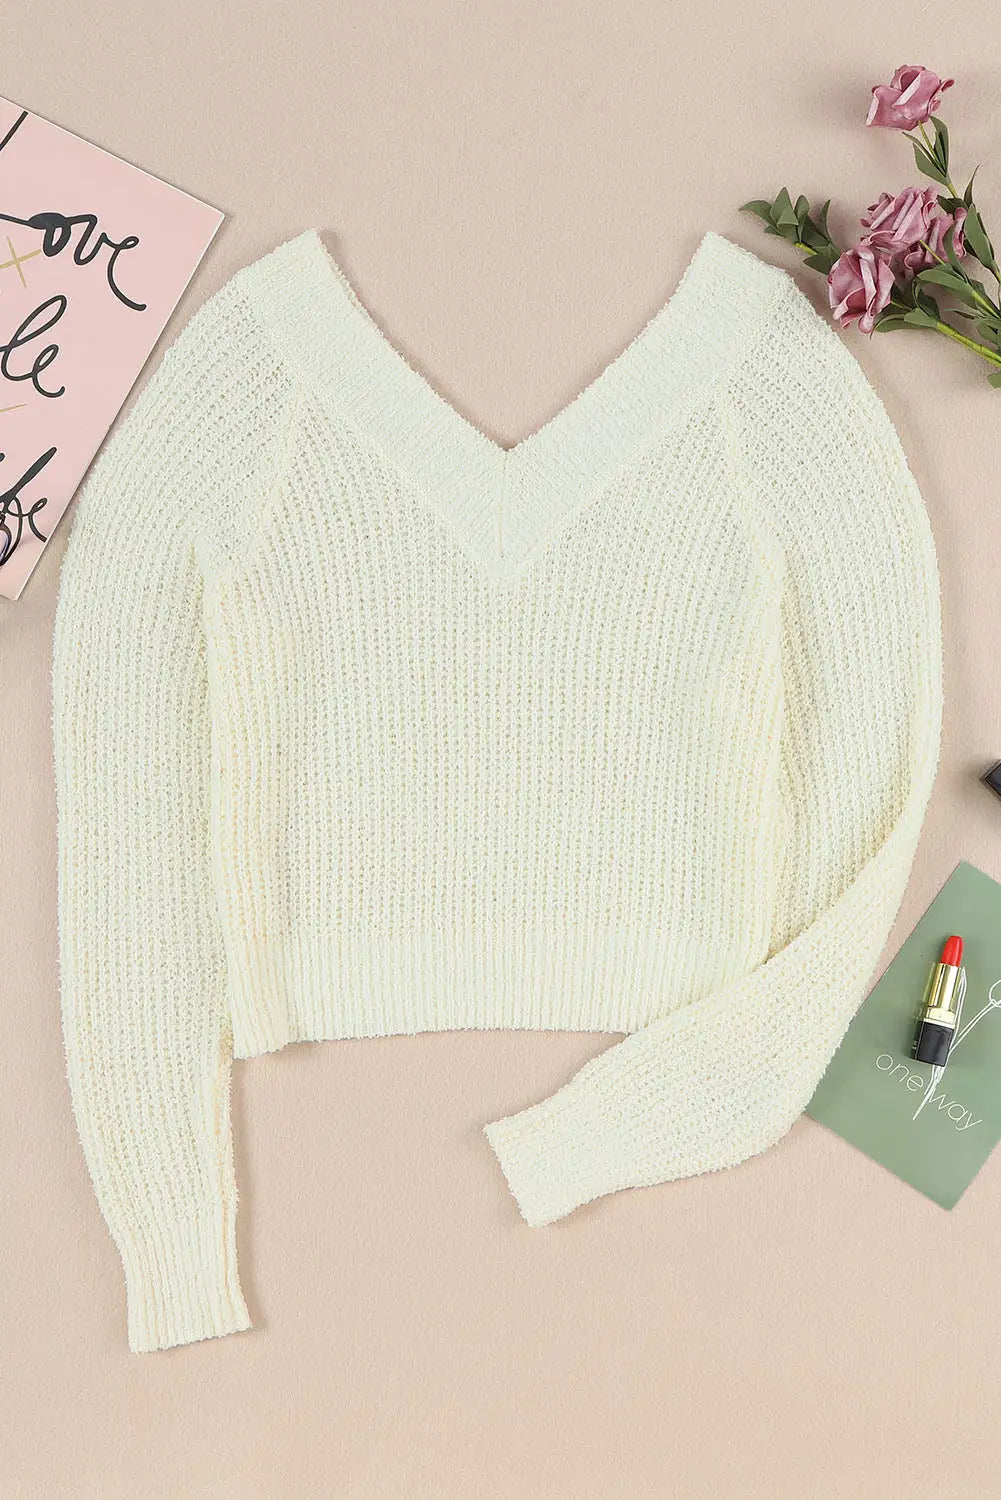 White cropped v neck fuzzy sweater - sweaters & cardigans